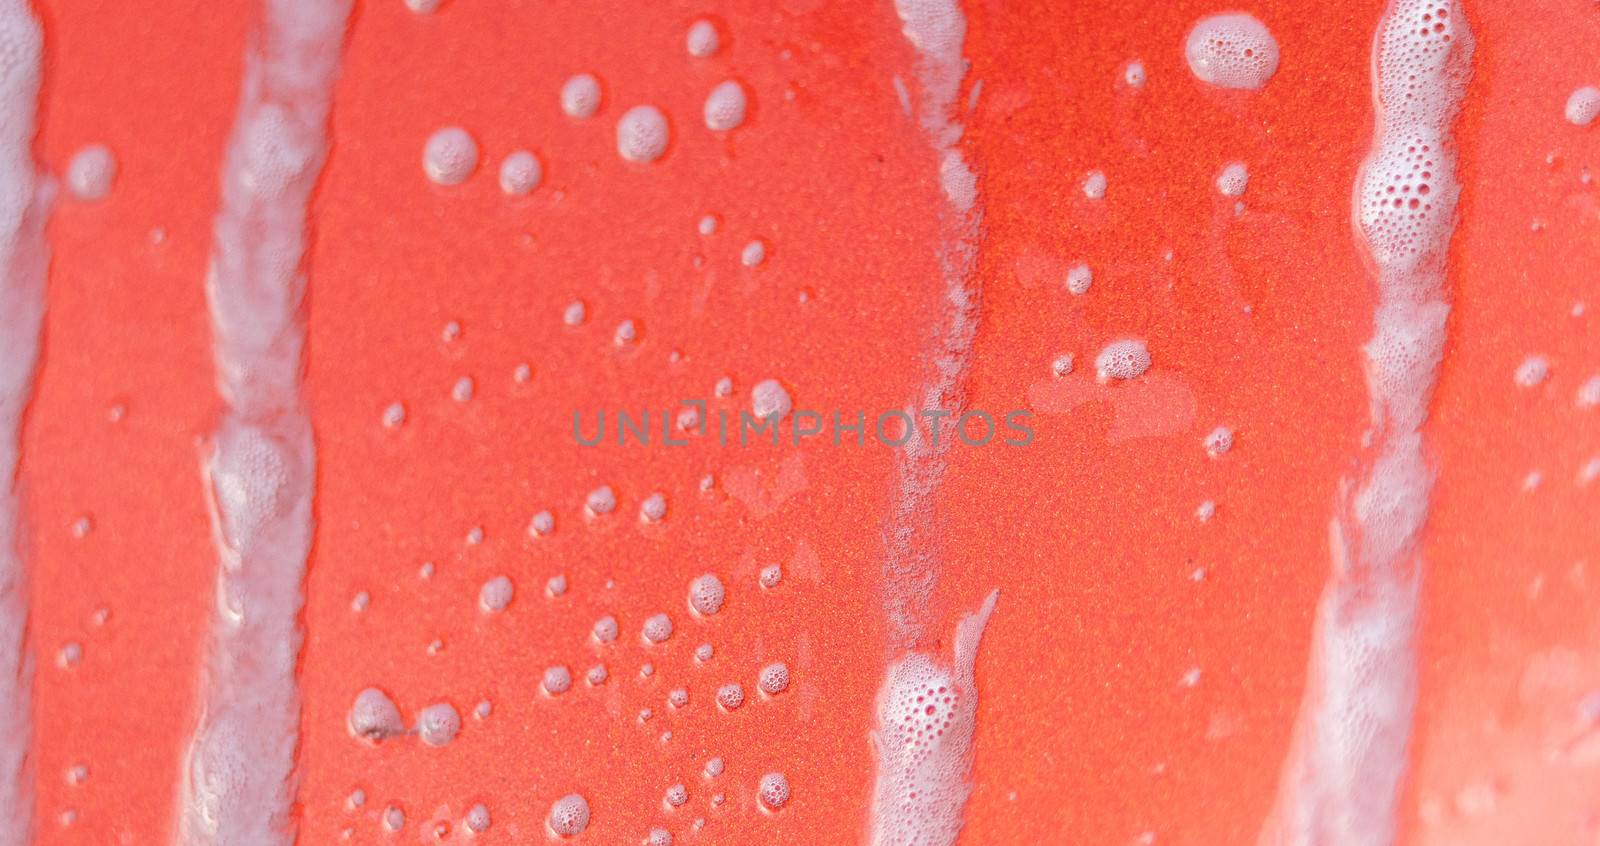 Bubble soap on the red car. Car washing concept.